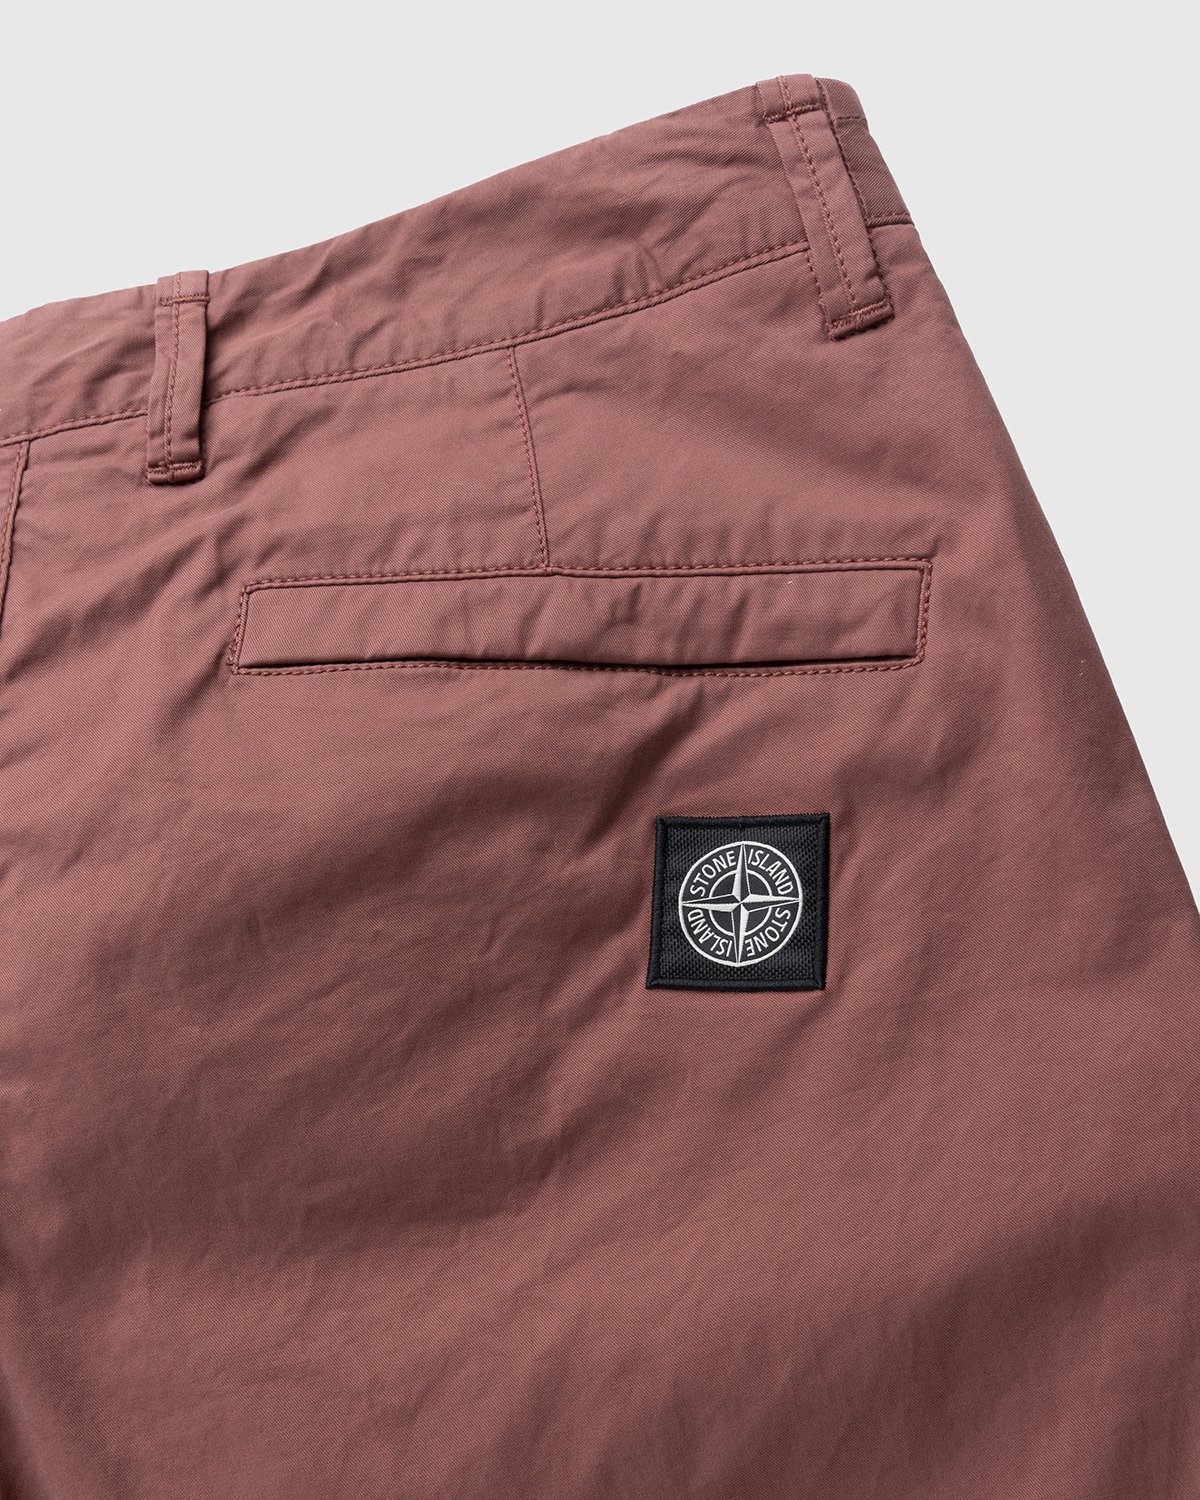 Stone Island - Pants Brick Red - Clothing - Red - Image 4